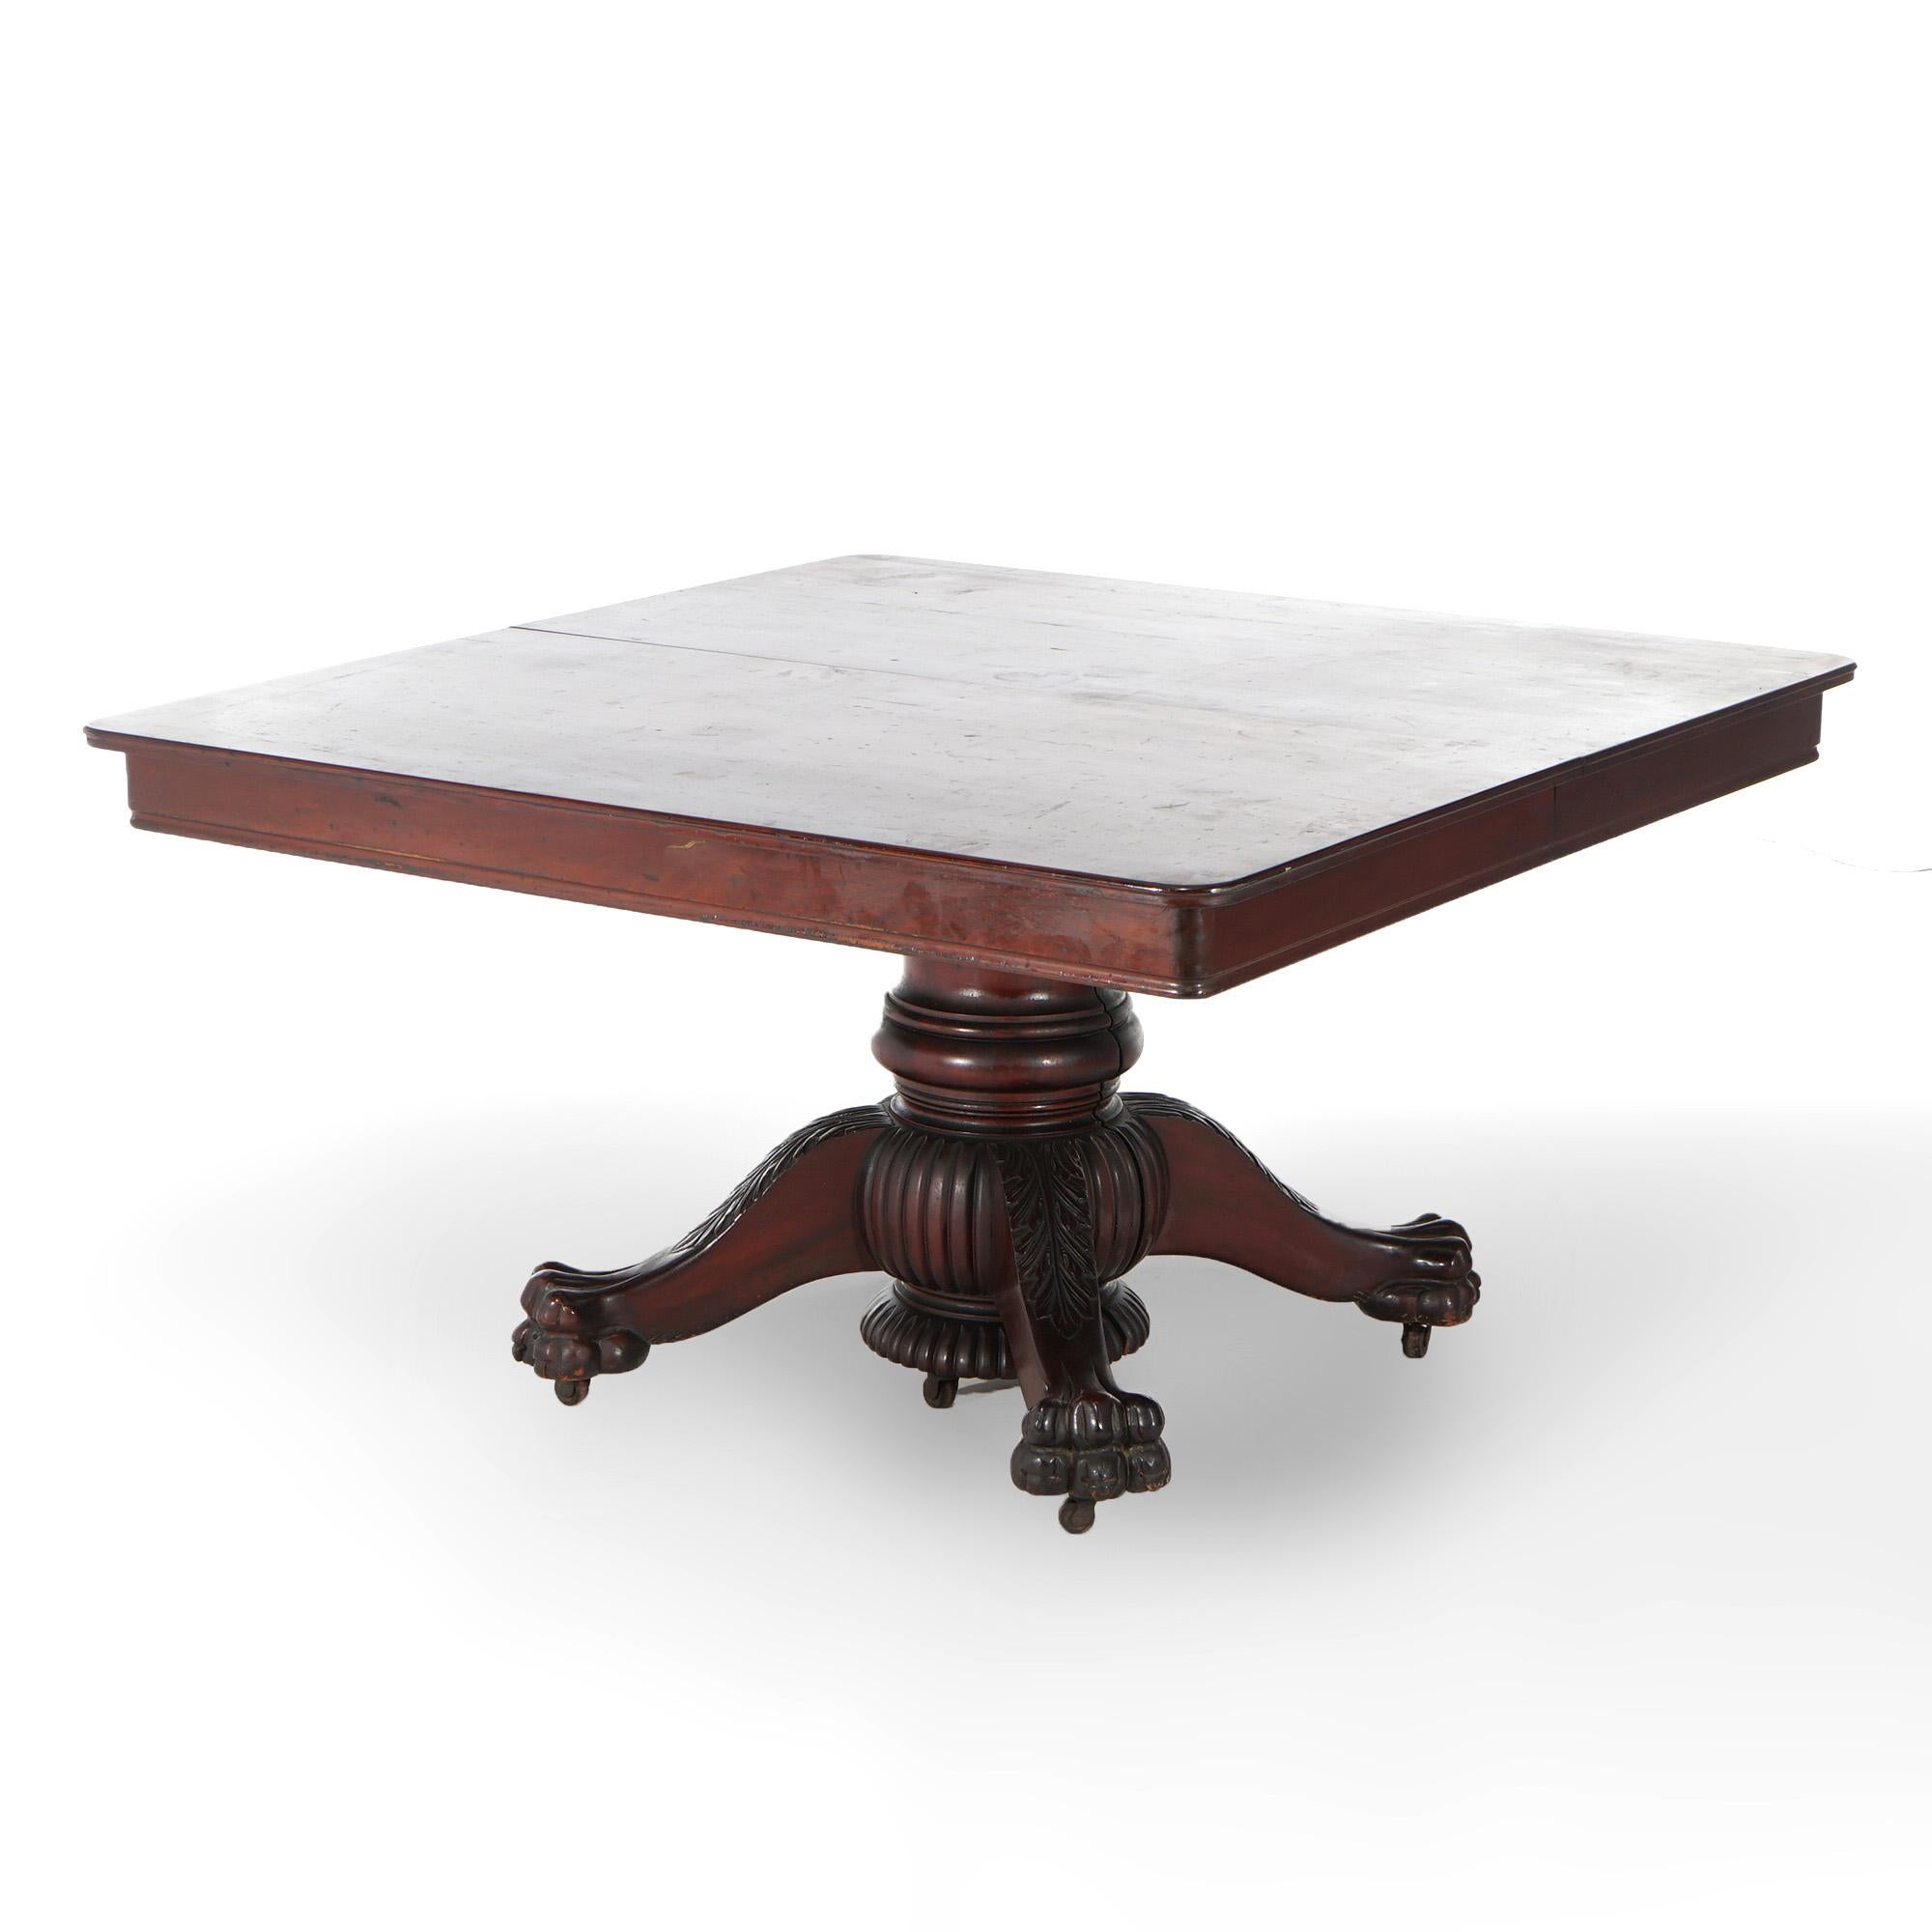 An antique American Empire extension banquet table offers mahogany construction with central split urn form pedestal with four legs terminating in carved paw feet; square table extends to accept up to six leaves; c1880
Carved Mahogany Banquet Table